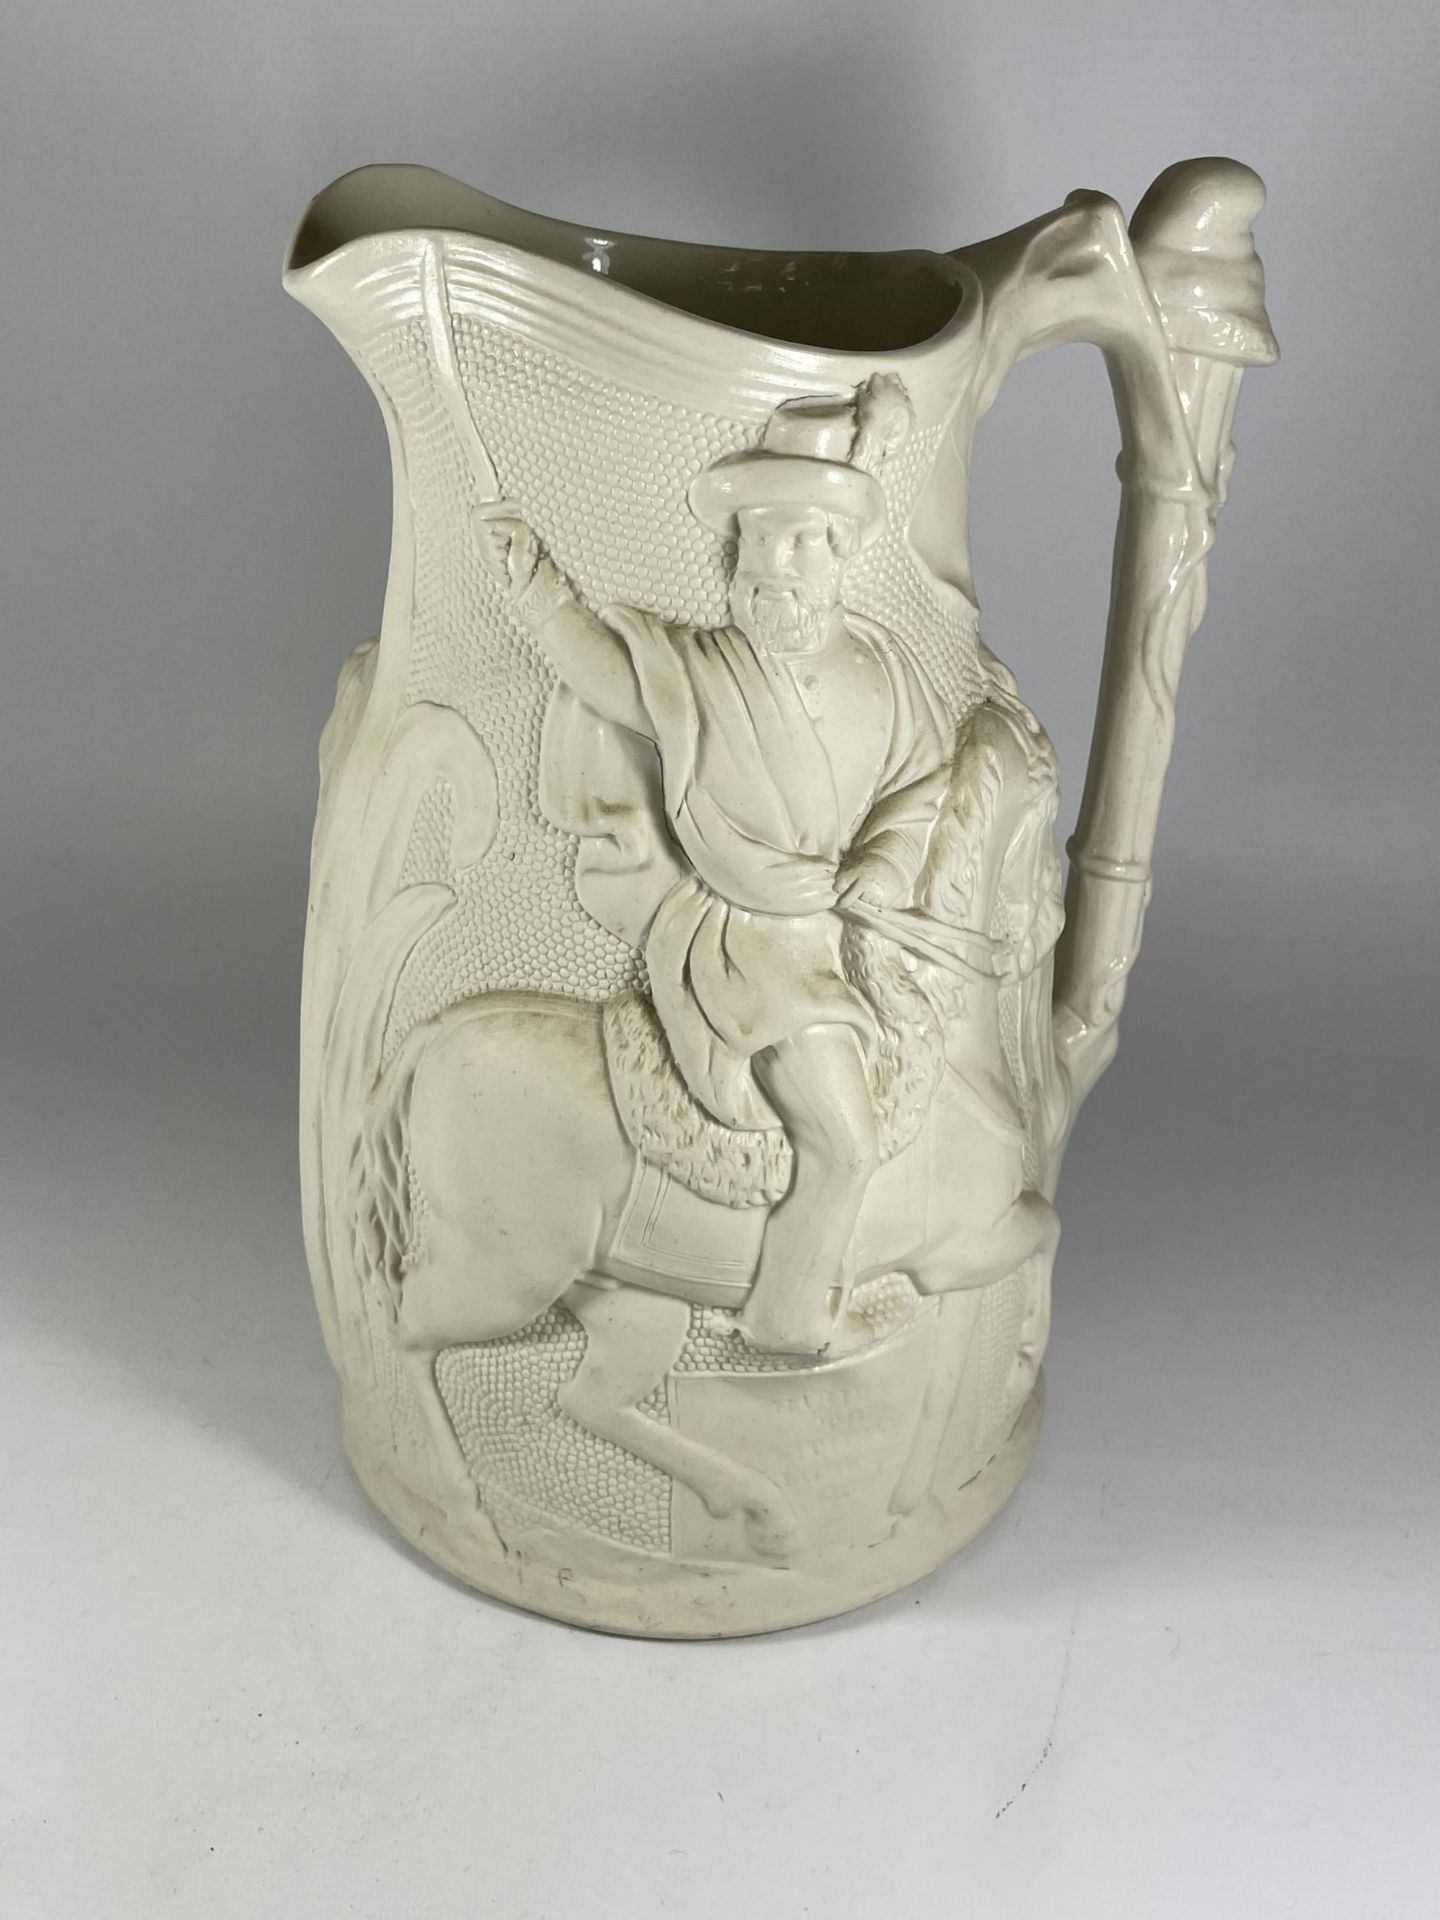 A LARGE PARIAN STYLE POTTERY JUG OF A MAN ON HORSEBACK, HEIGHT 31CM